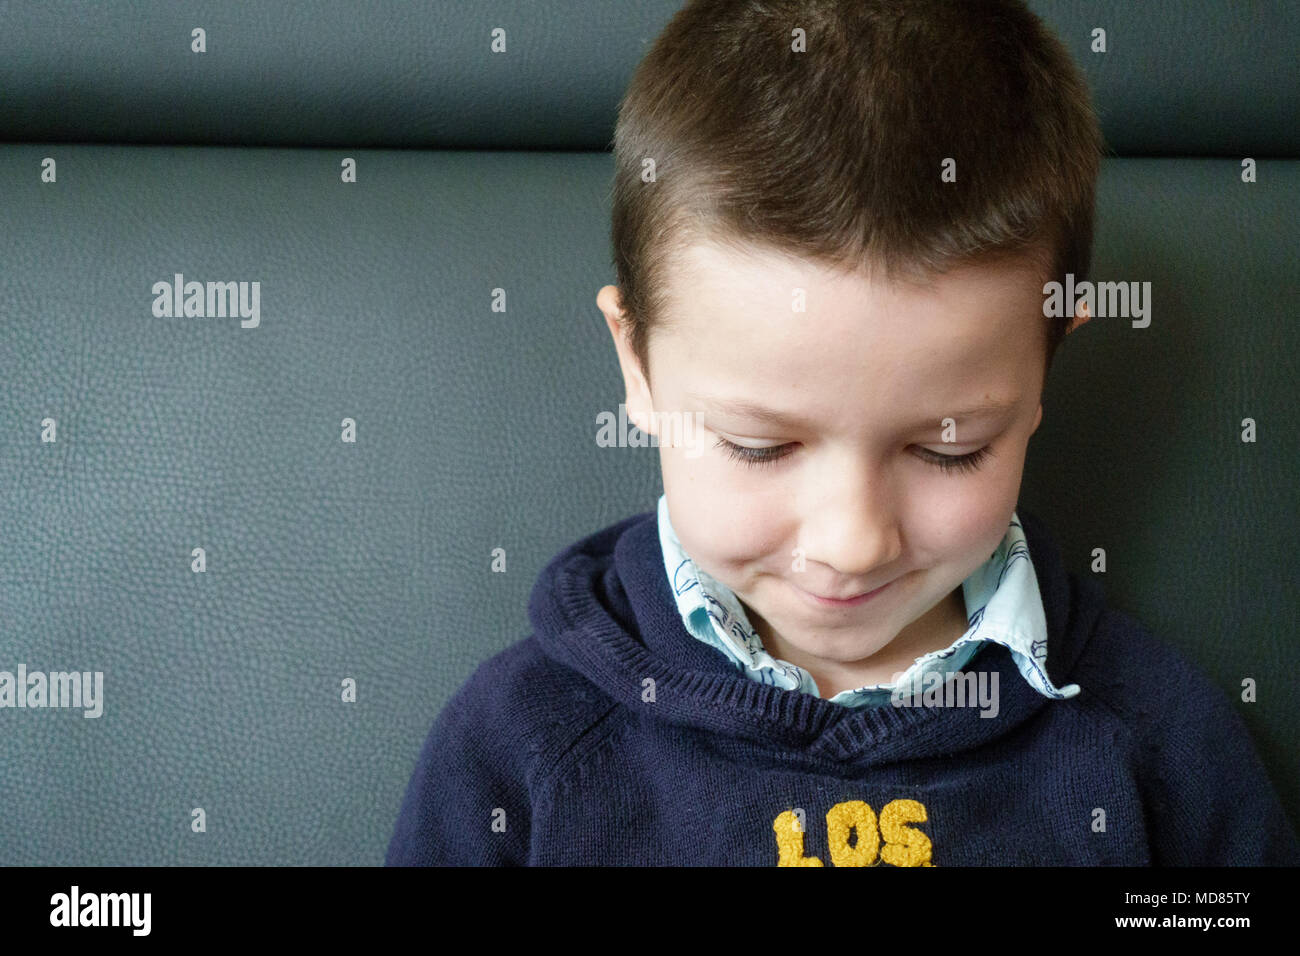 Close-up of boy sitting on couch Stock Photo